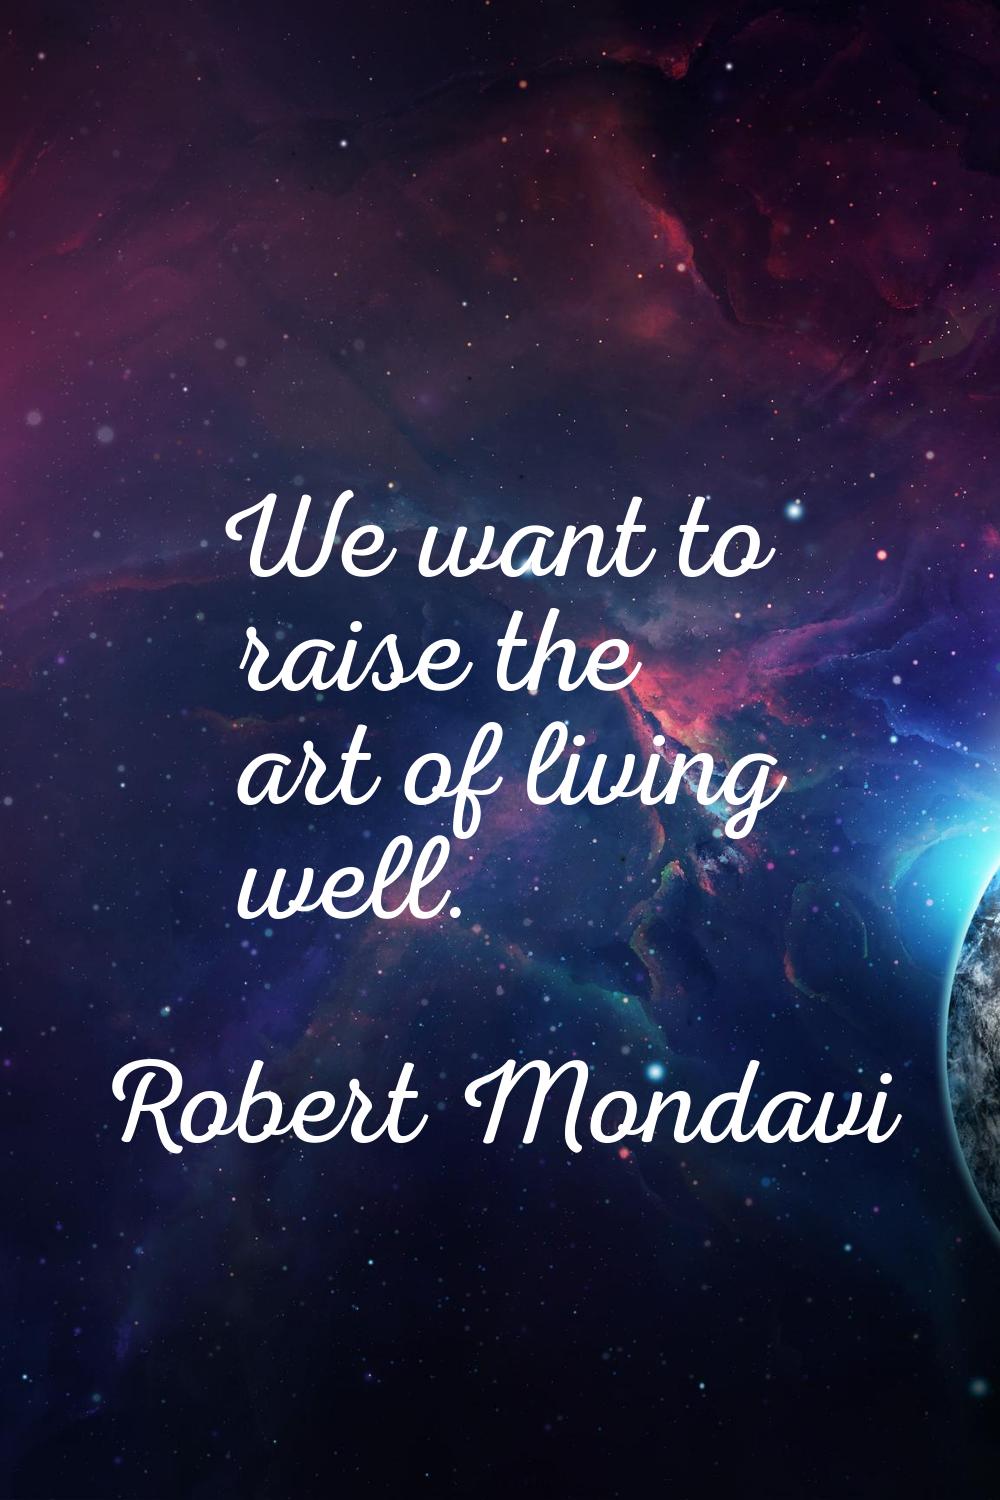 We want to raise the art of living well.